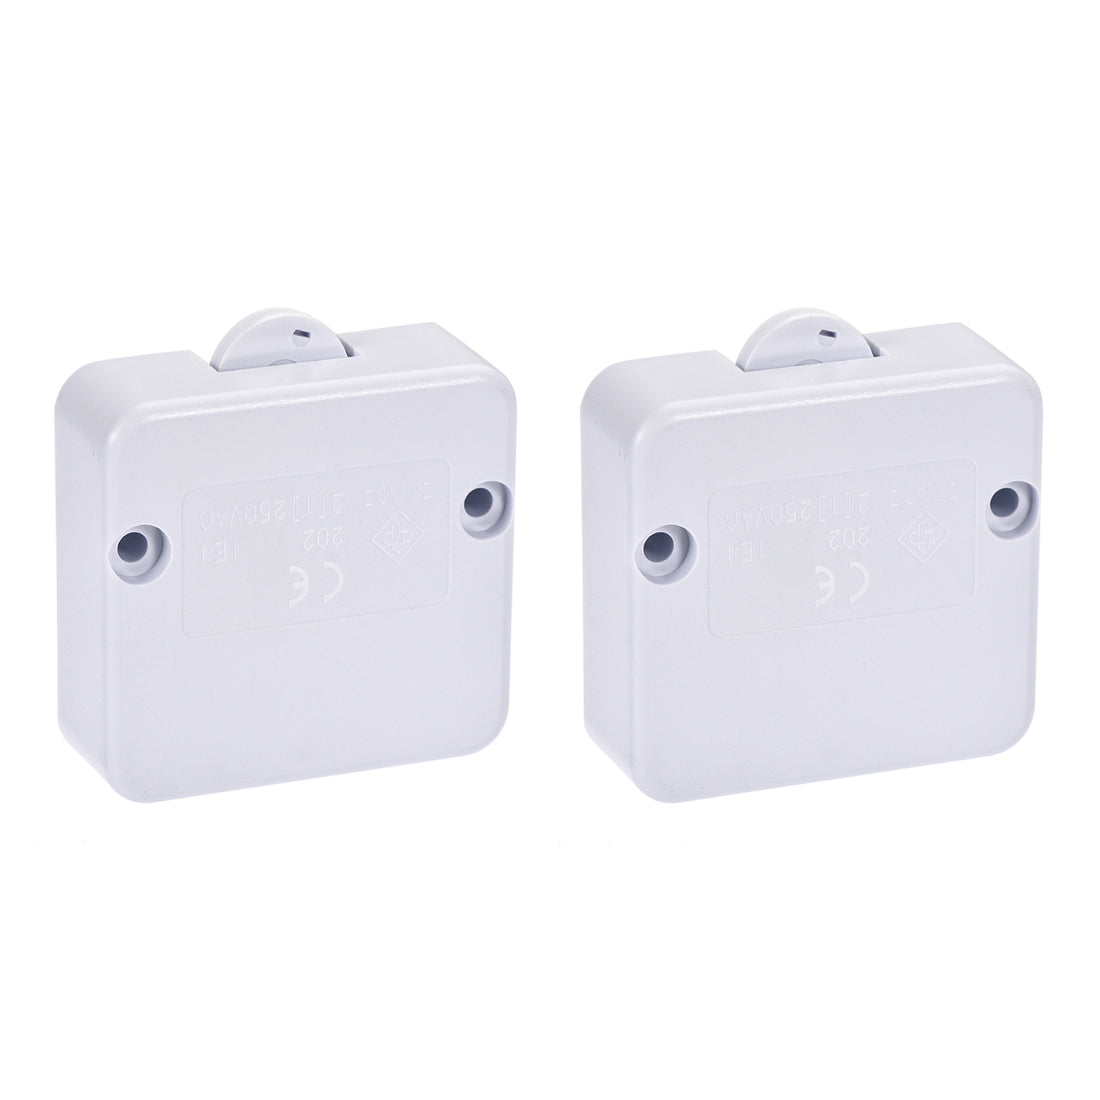 uxcell Uxcell Wardrobe Door Light Switch Momentary Closet Switches Normally Closed 110-250V 2A White 2 Pcs